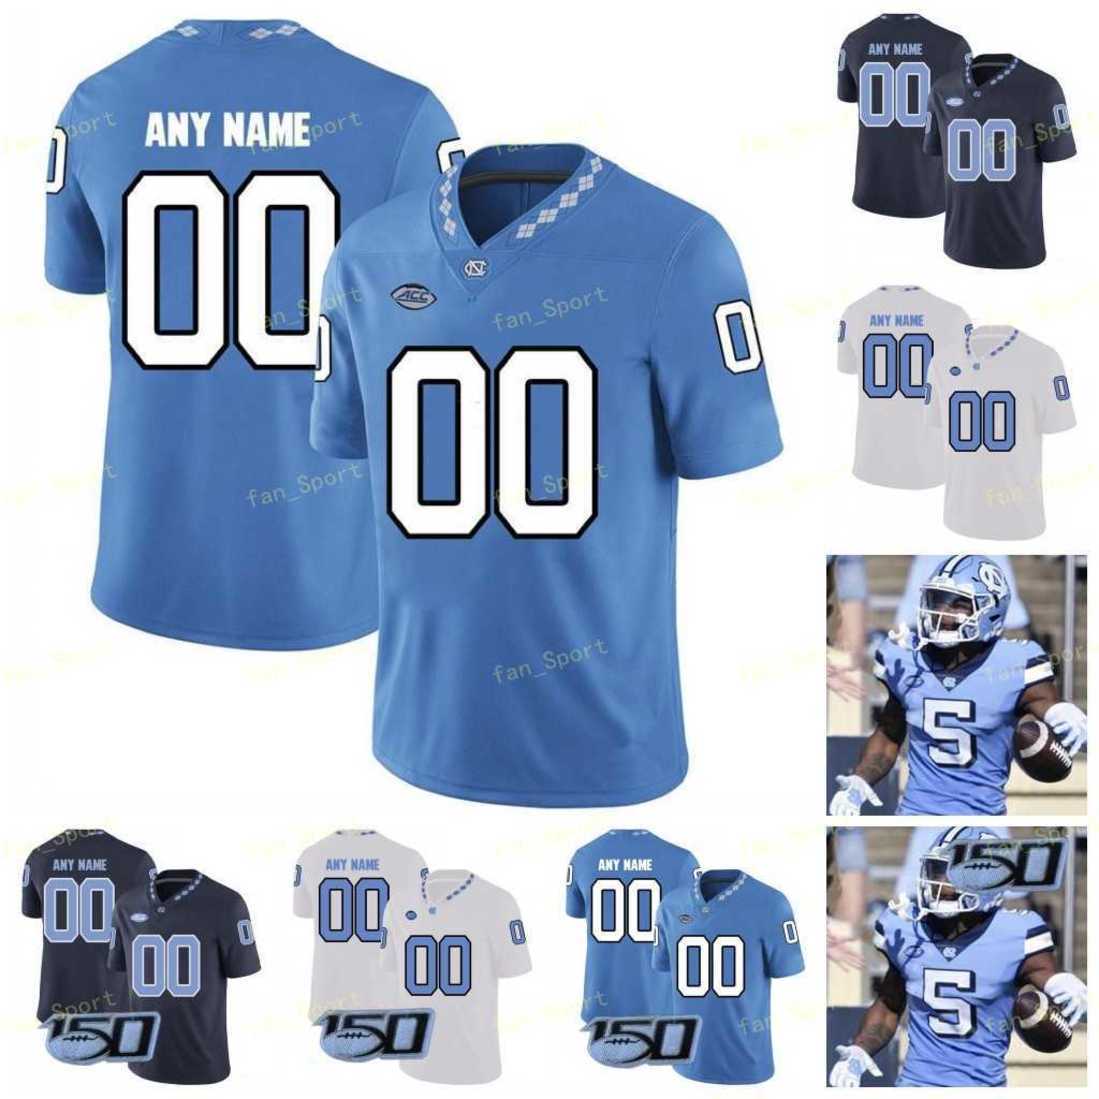 

North Carolina Football Jersey NCAA College Lawrence Taylor Mitchell Trubisky Ryan Switzer JULIUS PEPPERS Sam Howell Carter Williams Brown, As